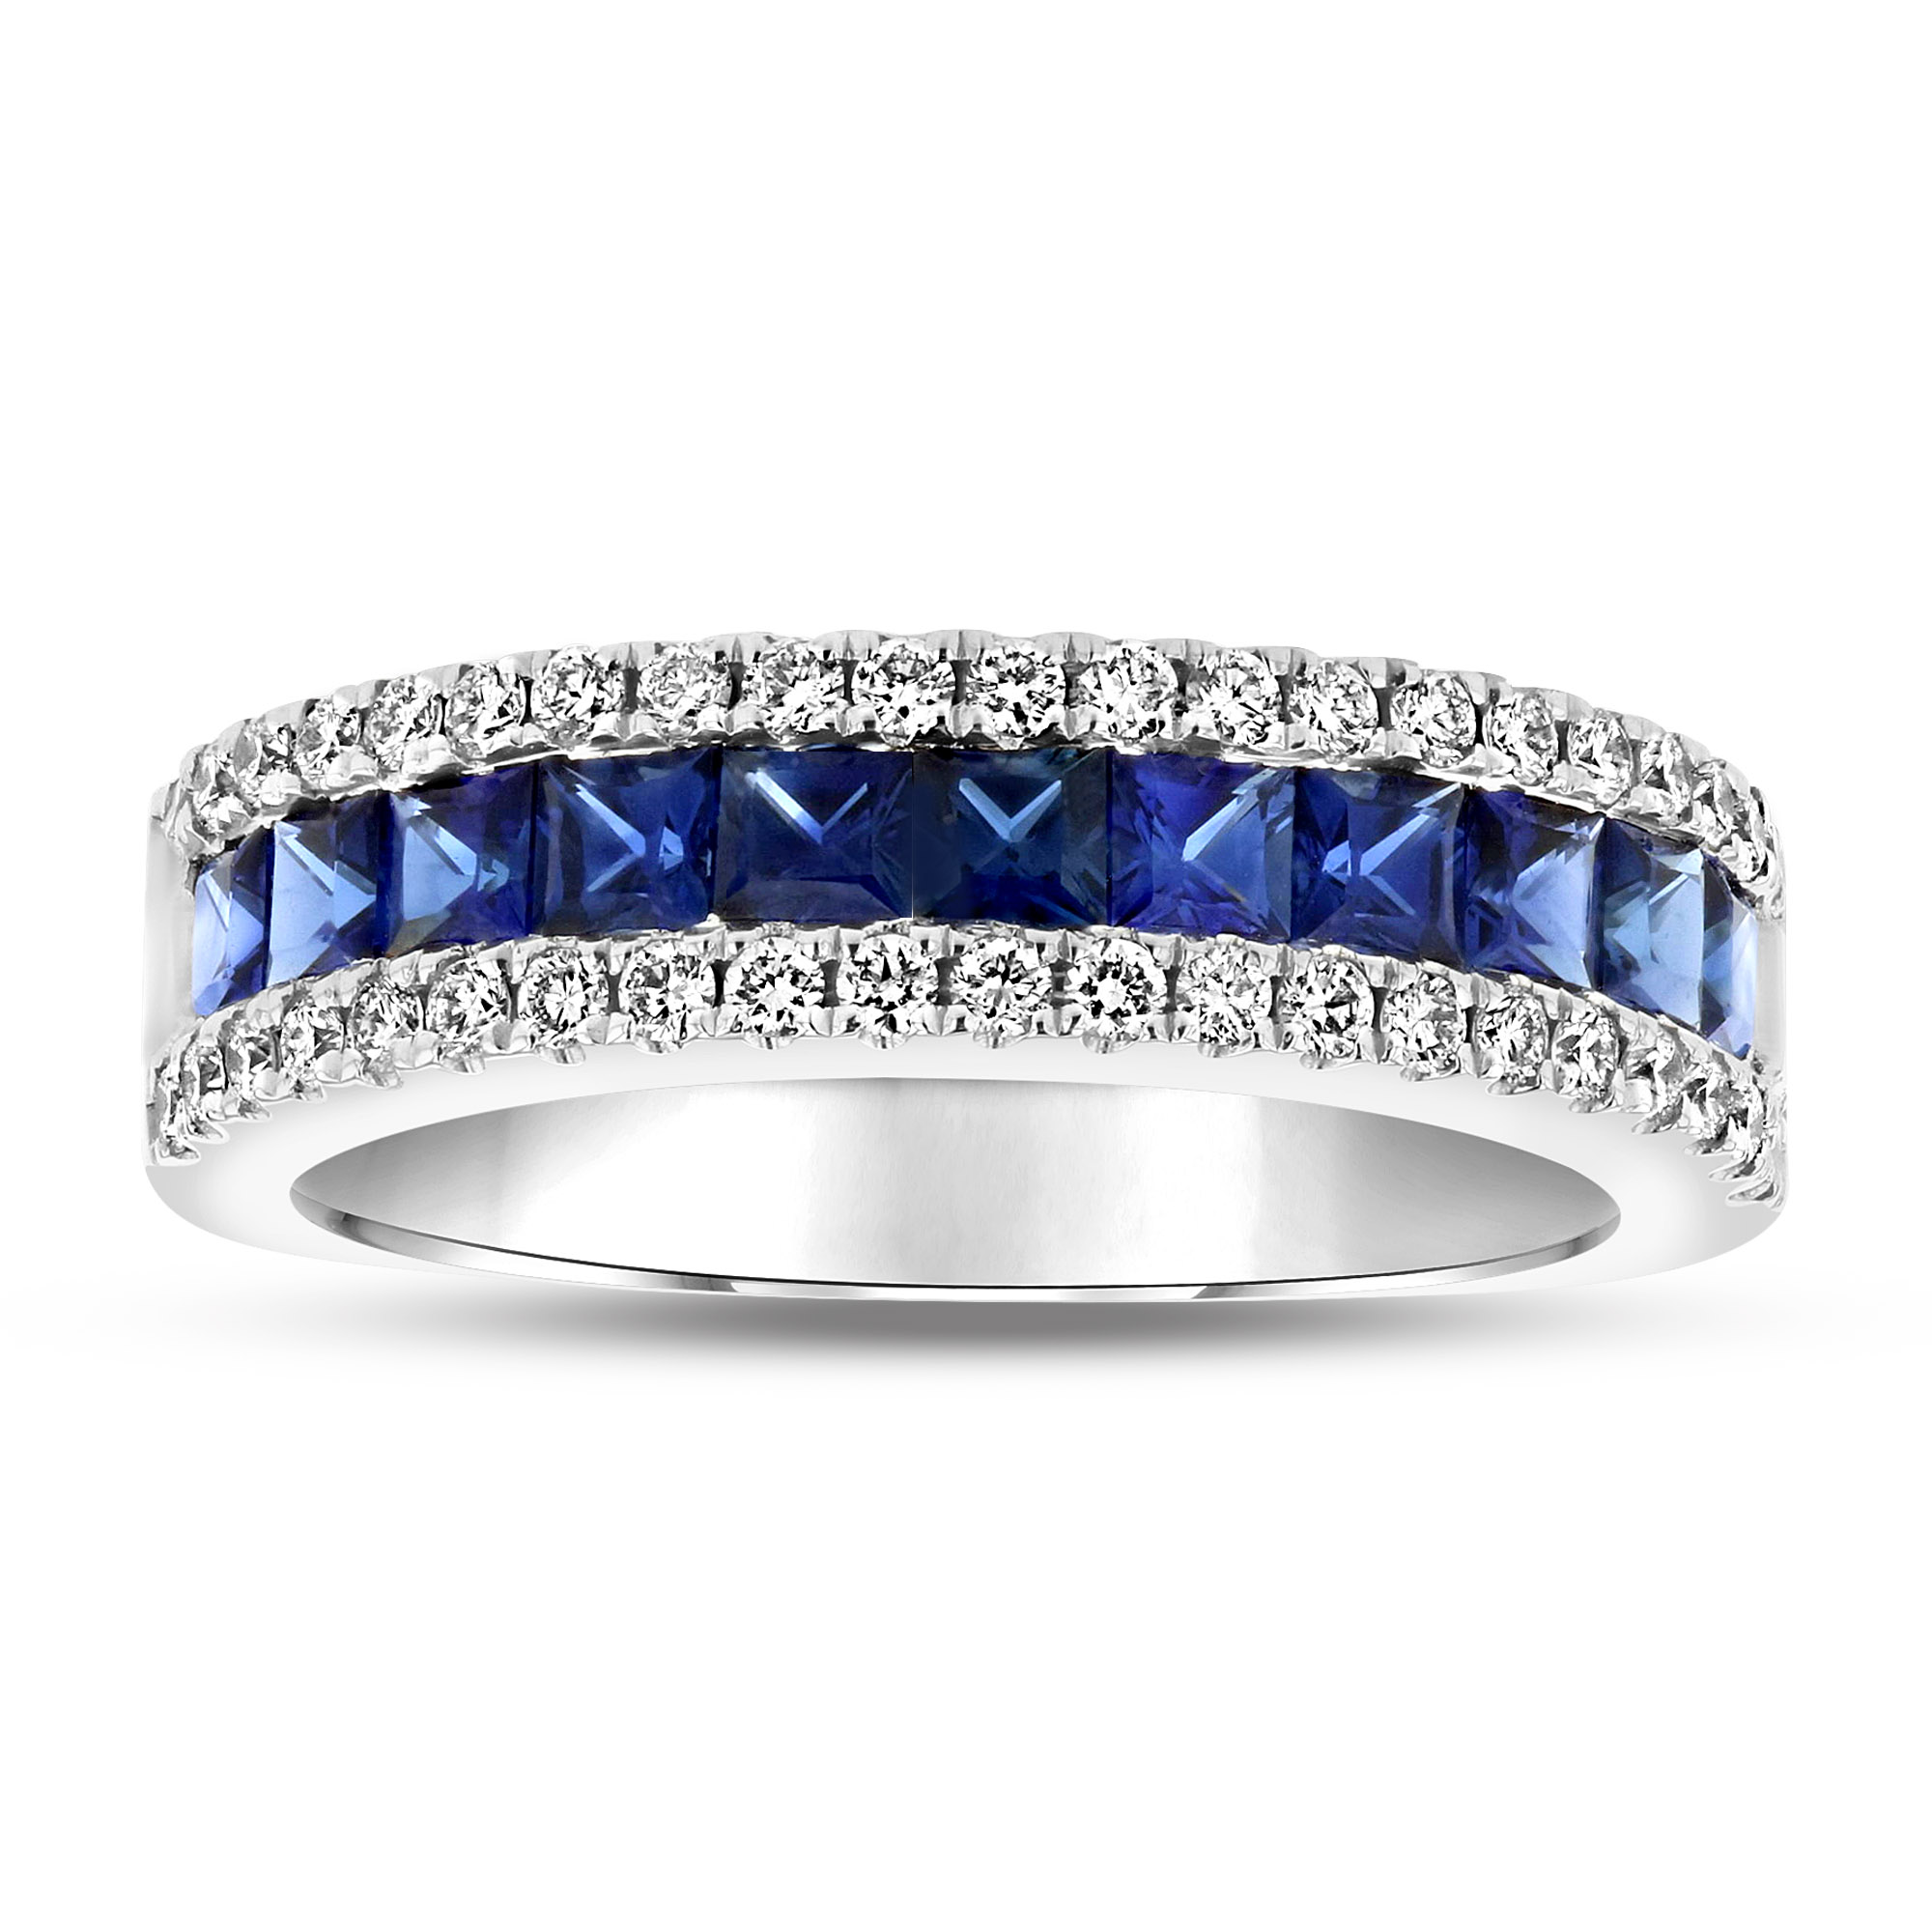 1.42ctw Diamond and Sapphire Ring in 18k White Gold